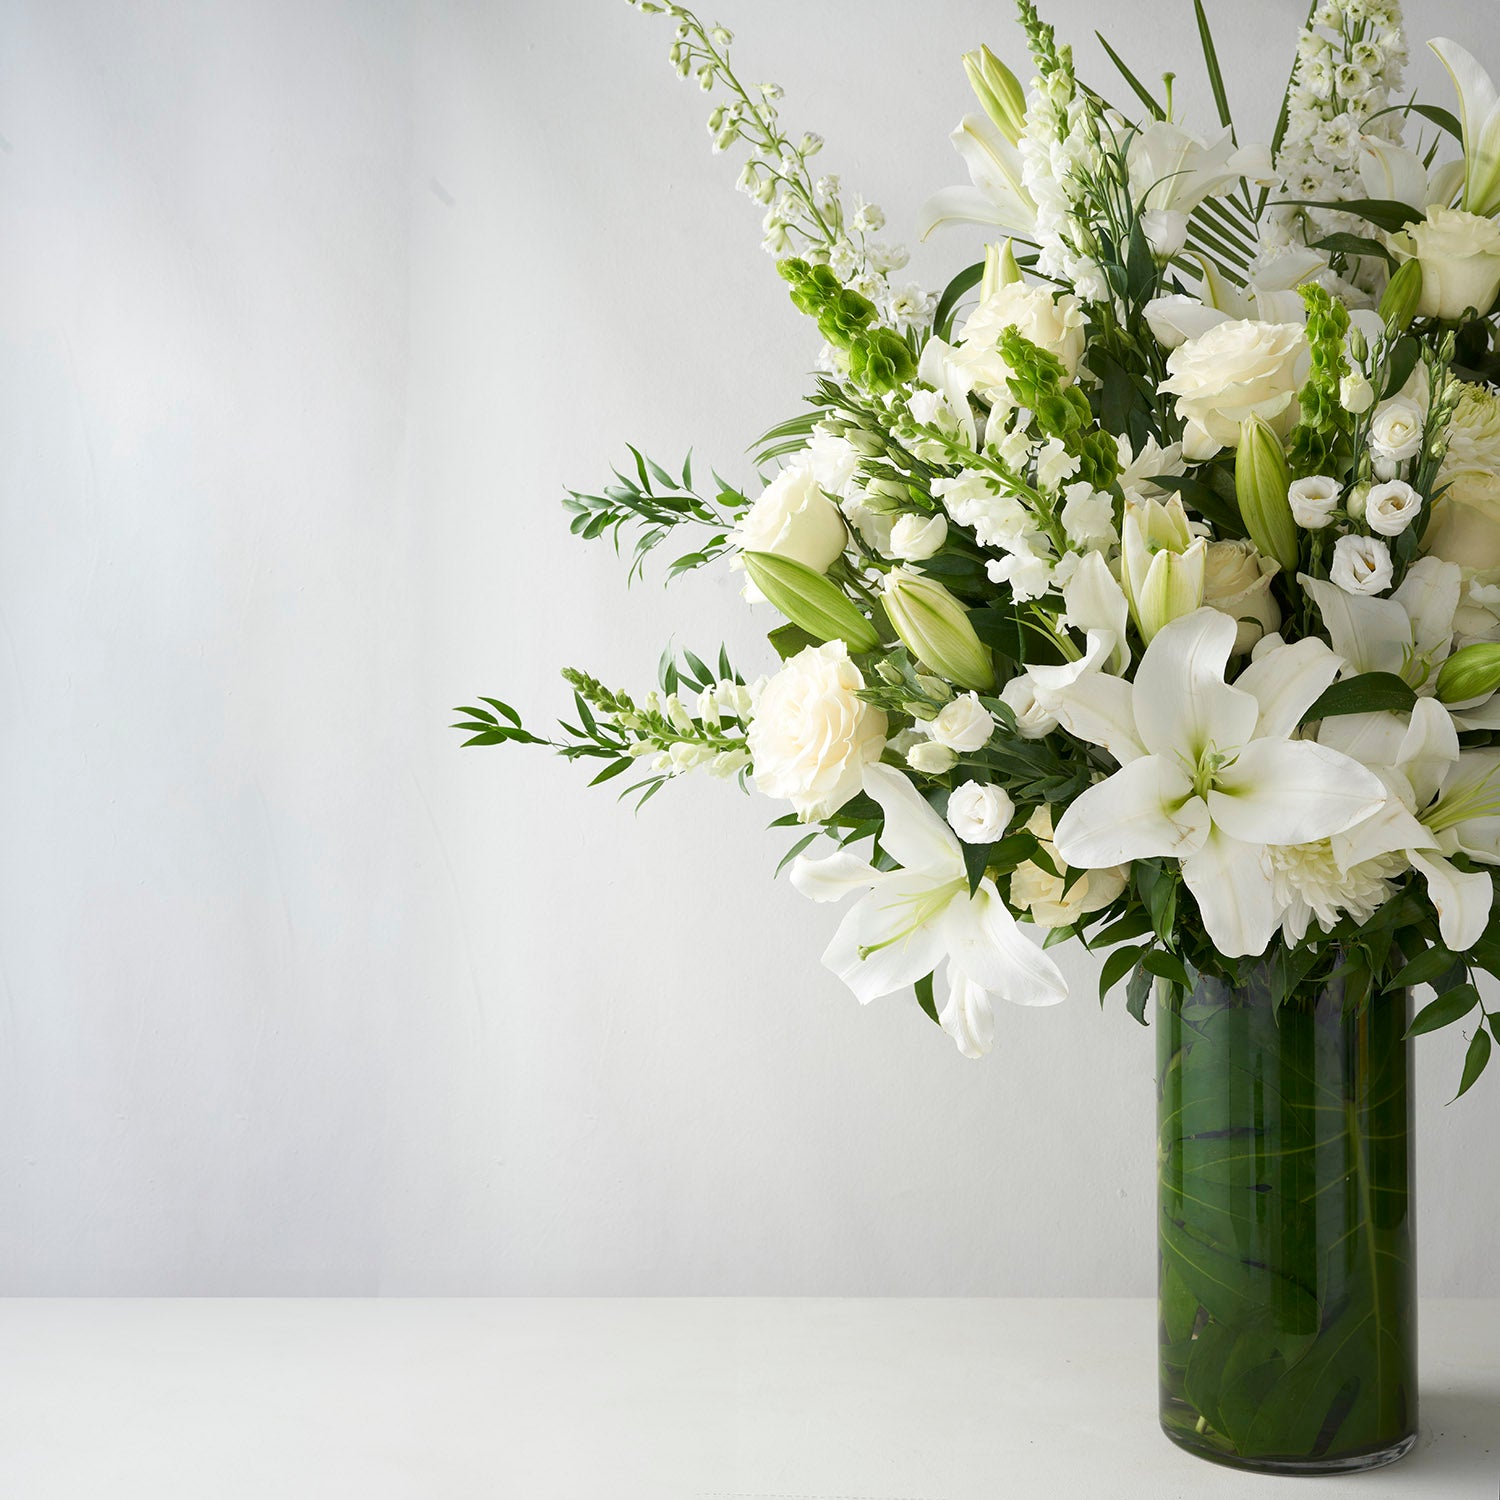 Large glass vase full of white flowers including lilies. roses, snapdragons, and delphinium.